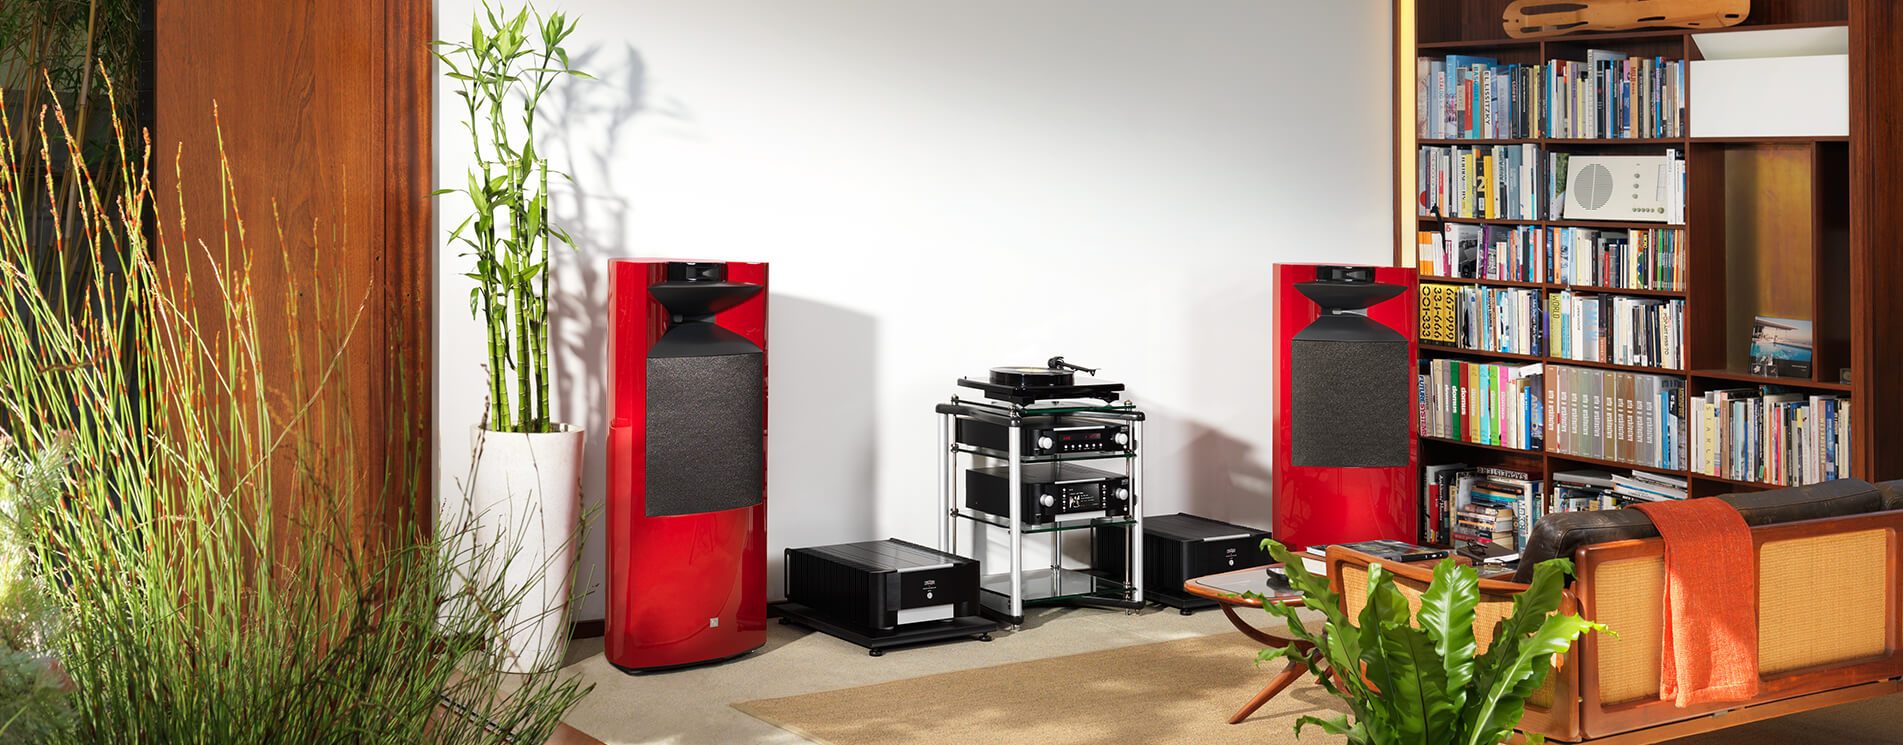 EXPERIENCE THE WORLD OF MARK LEVINSON